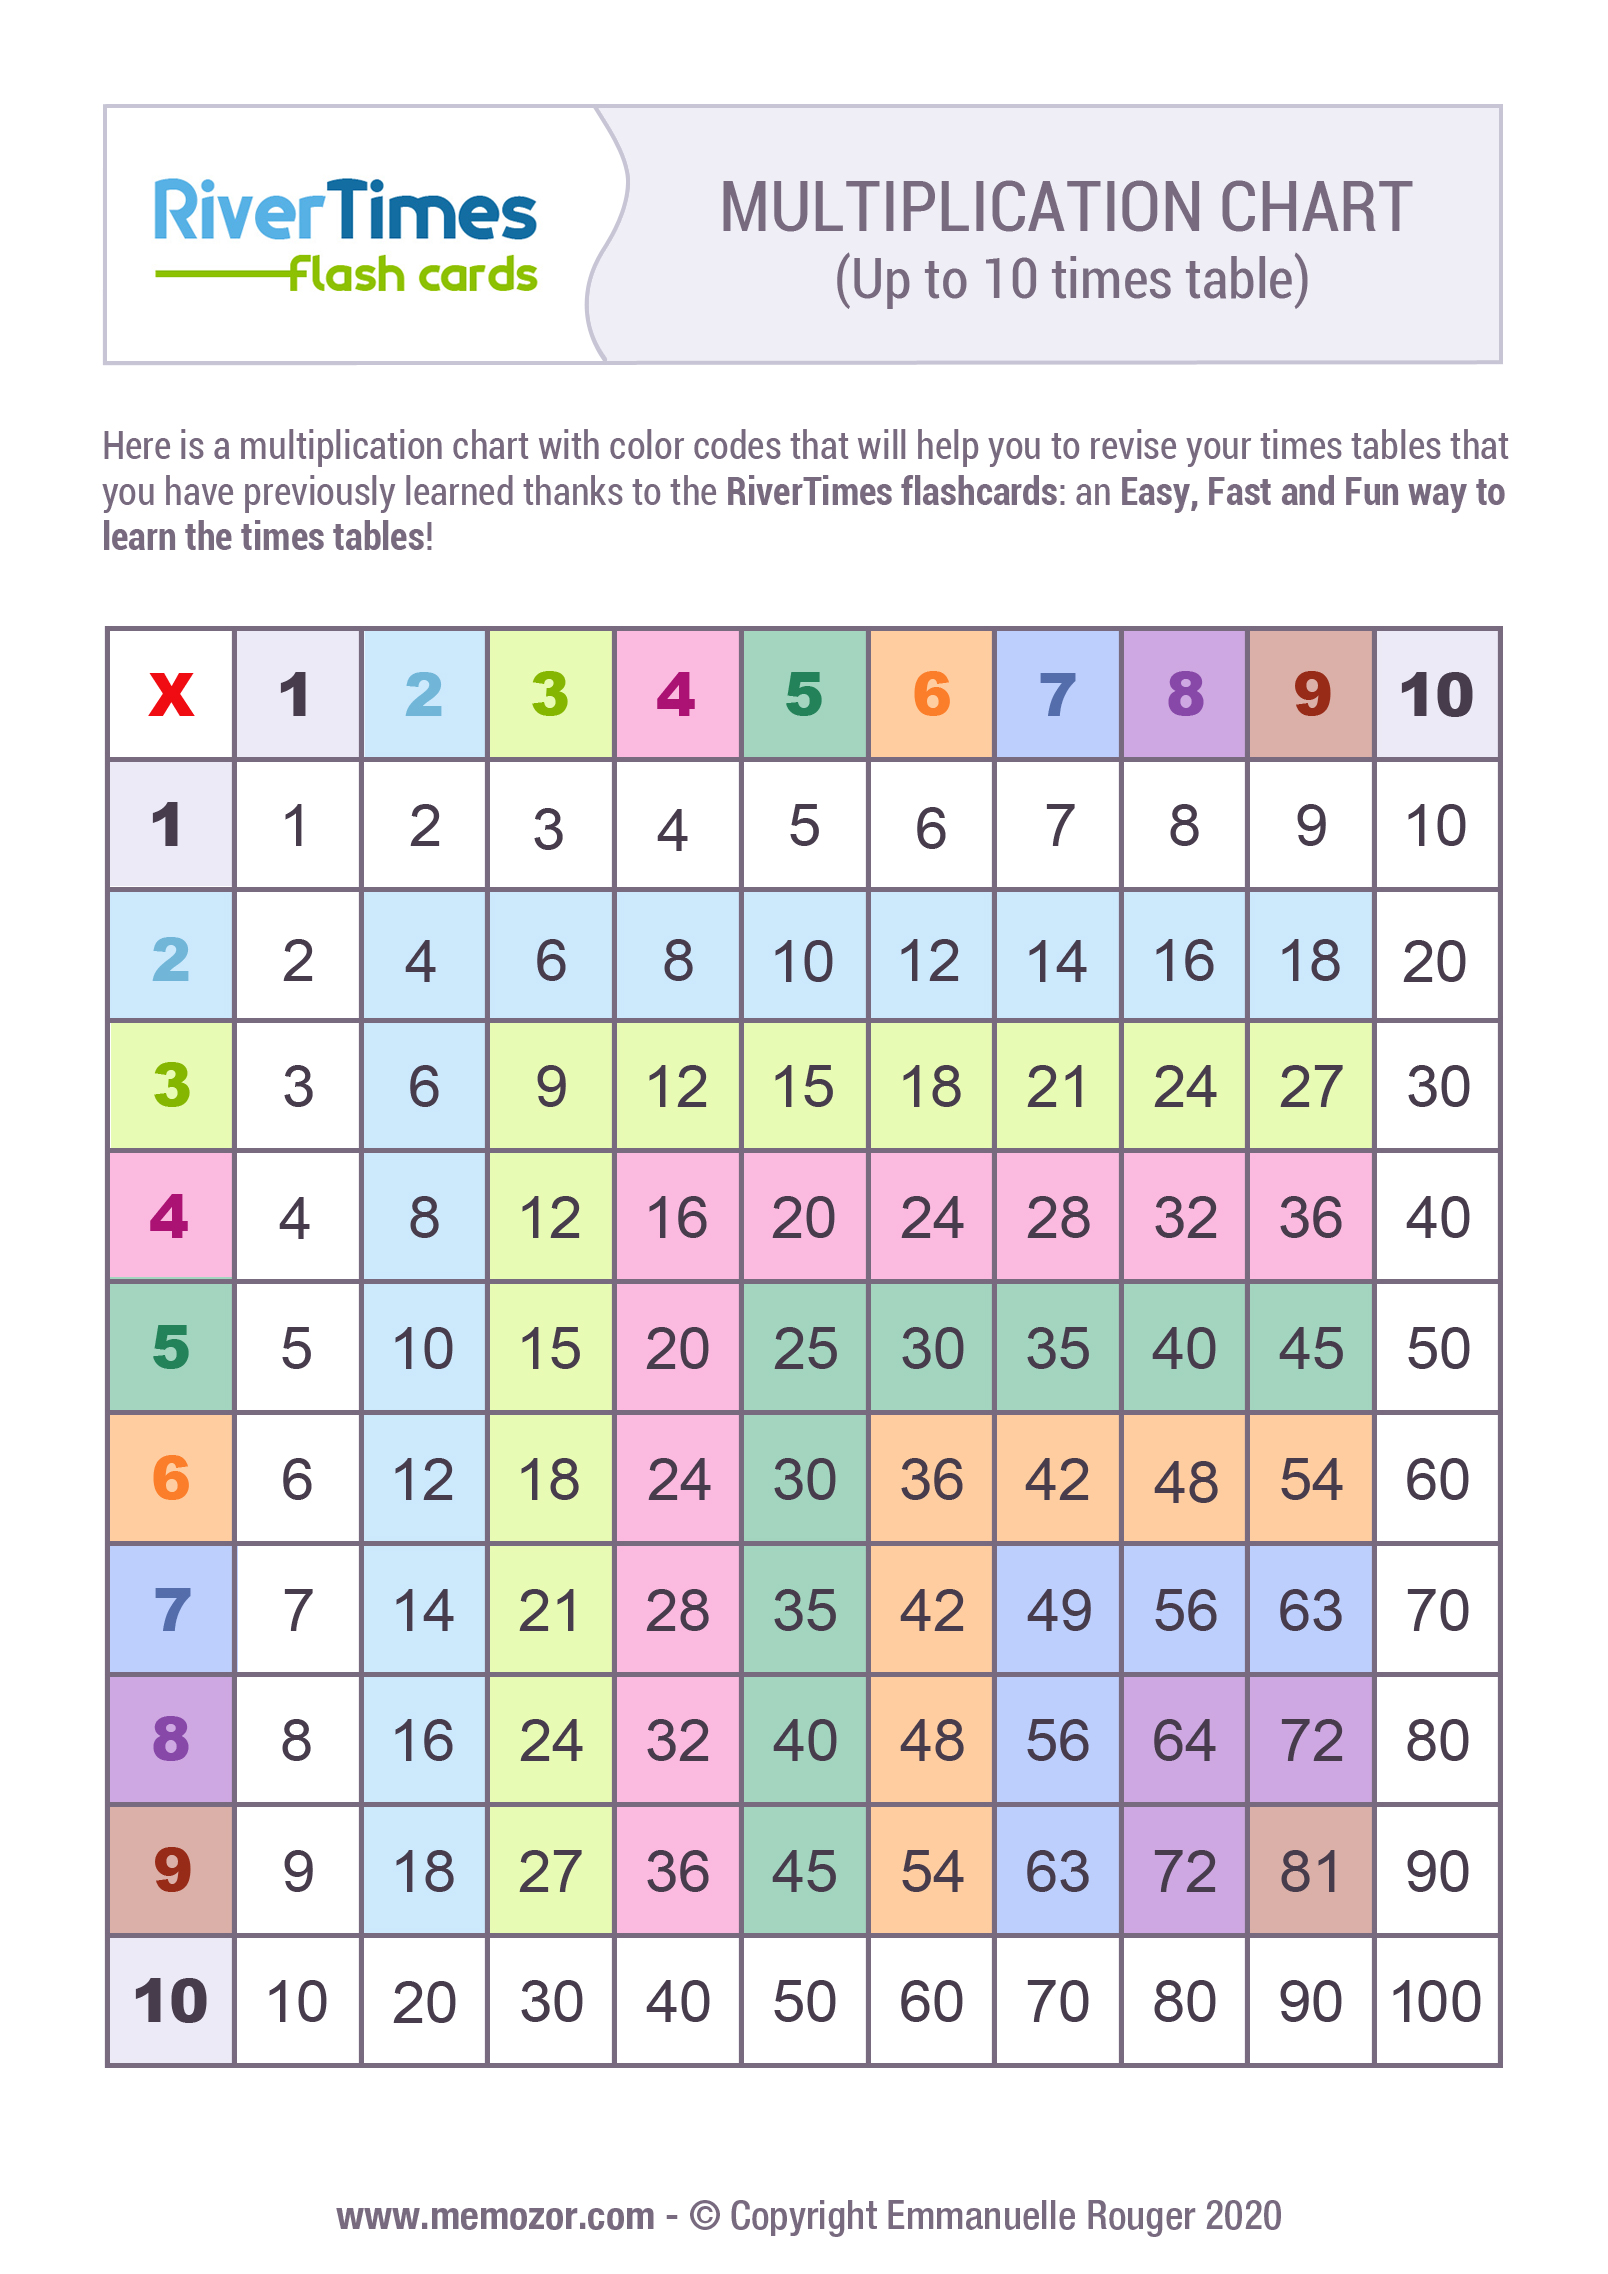 Complete & Colourful multiplication table to print Memozor